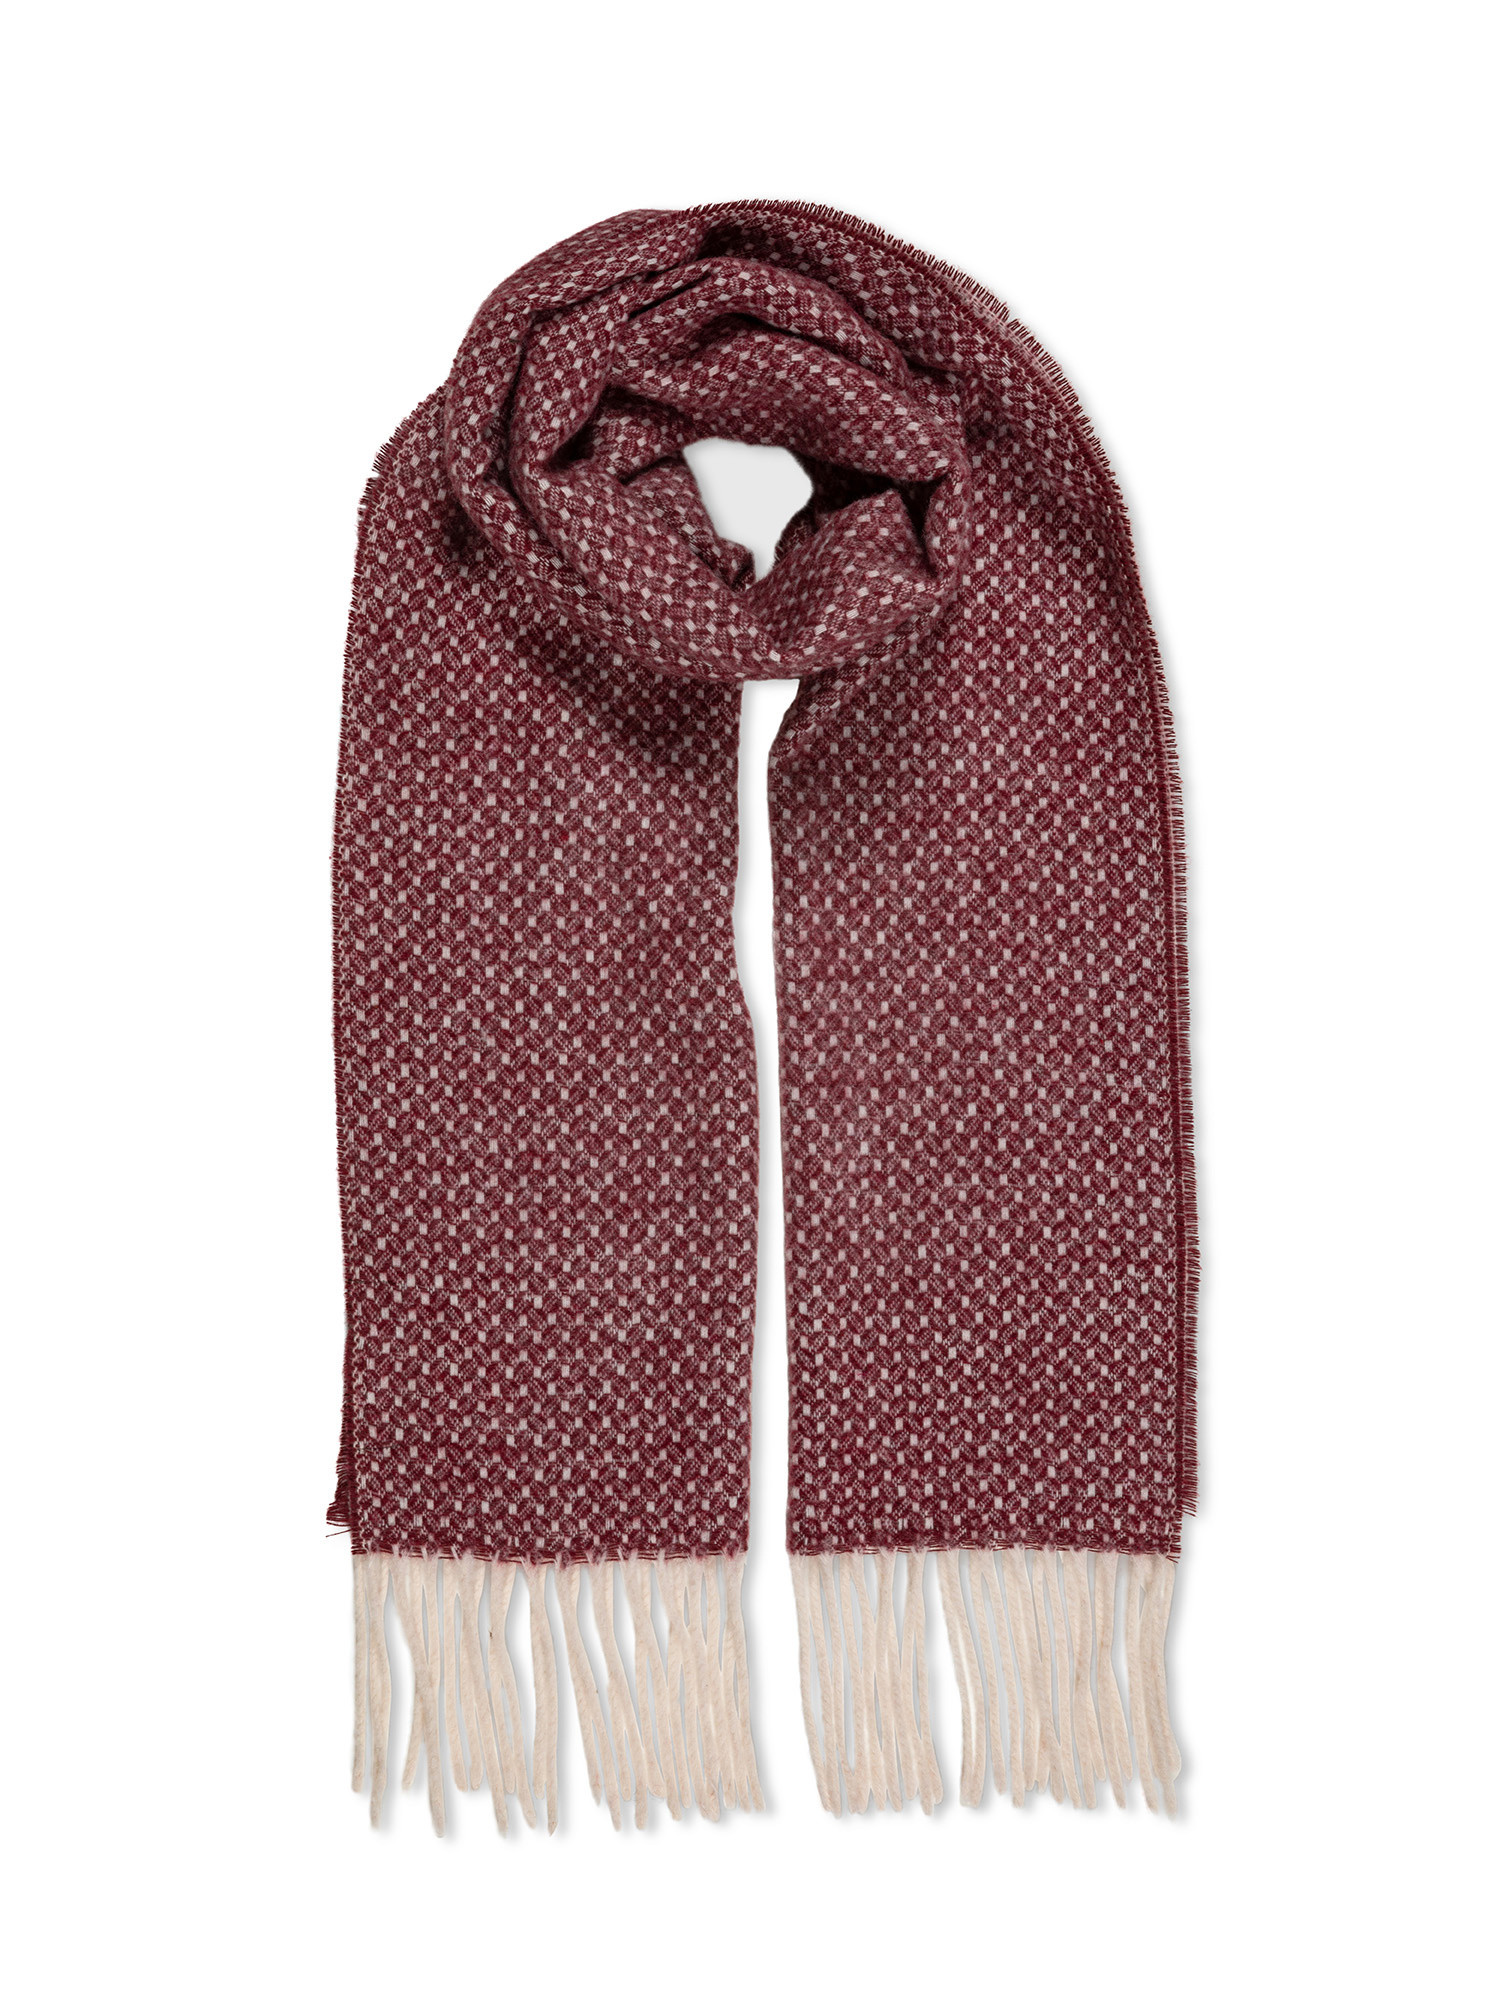 Luca D'Altieri - Micro patterned scarf, Red Bordeaux, large image number 0